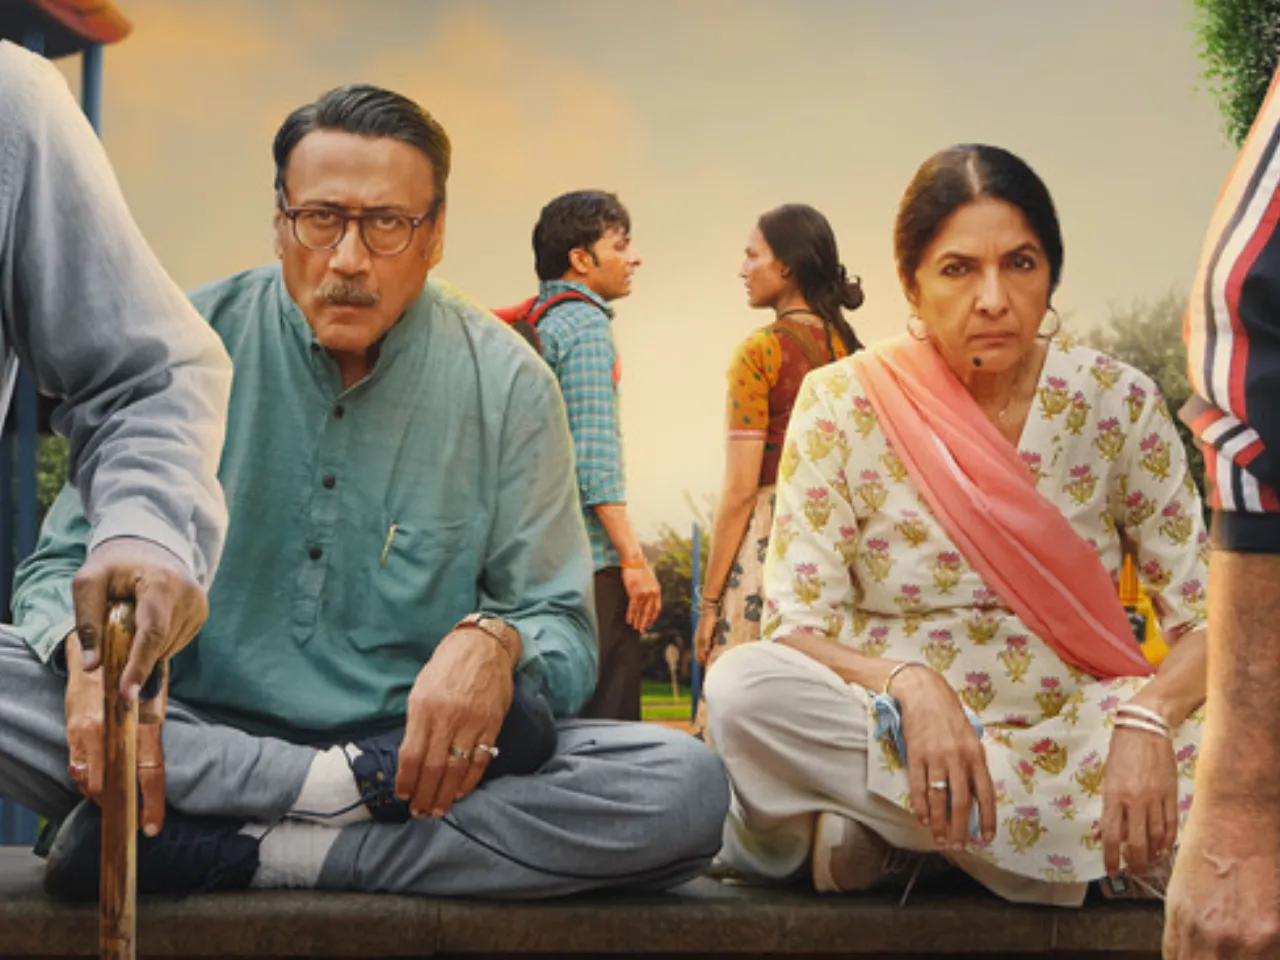 Mast Mein Rehne Ka review: If you're looking for a feel-good film, this goofy, slice of life film is perfect for you!